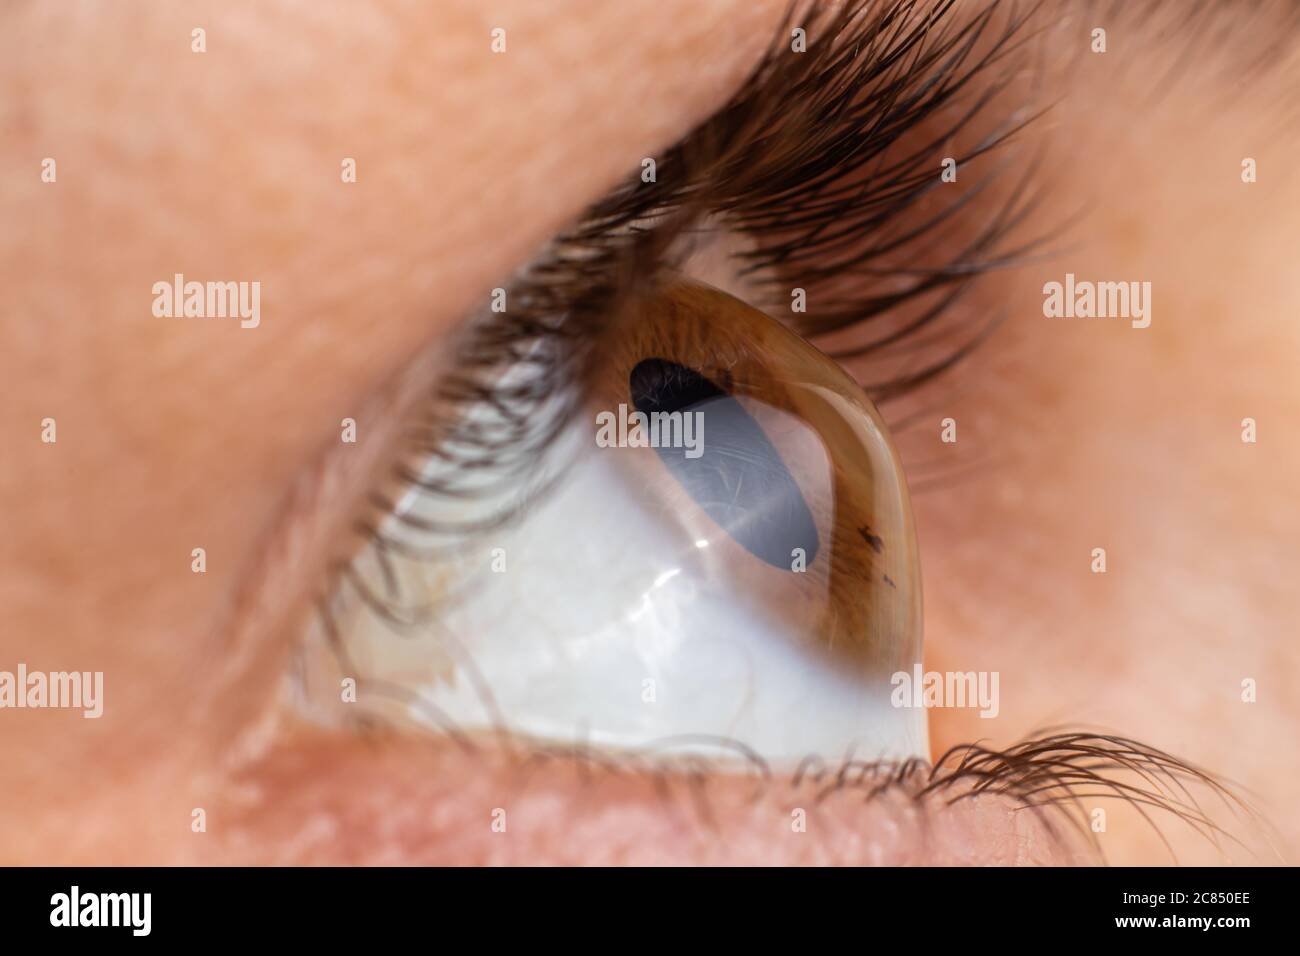 Keratoconus of eye, 4th degree. Contortion of the cornea in the form of a cone, deterioration of vision, astigmatism. Macro close up. Stock Photo